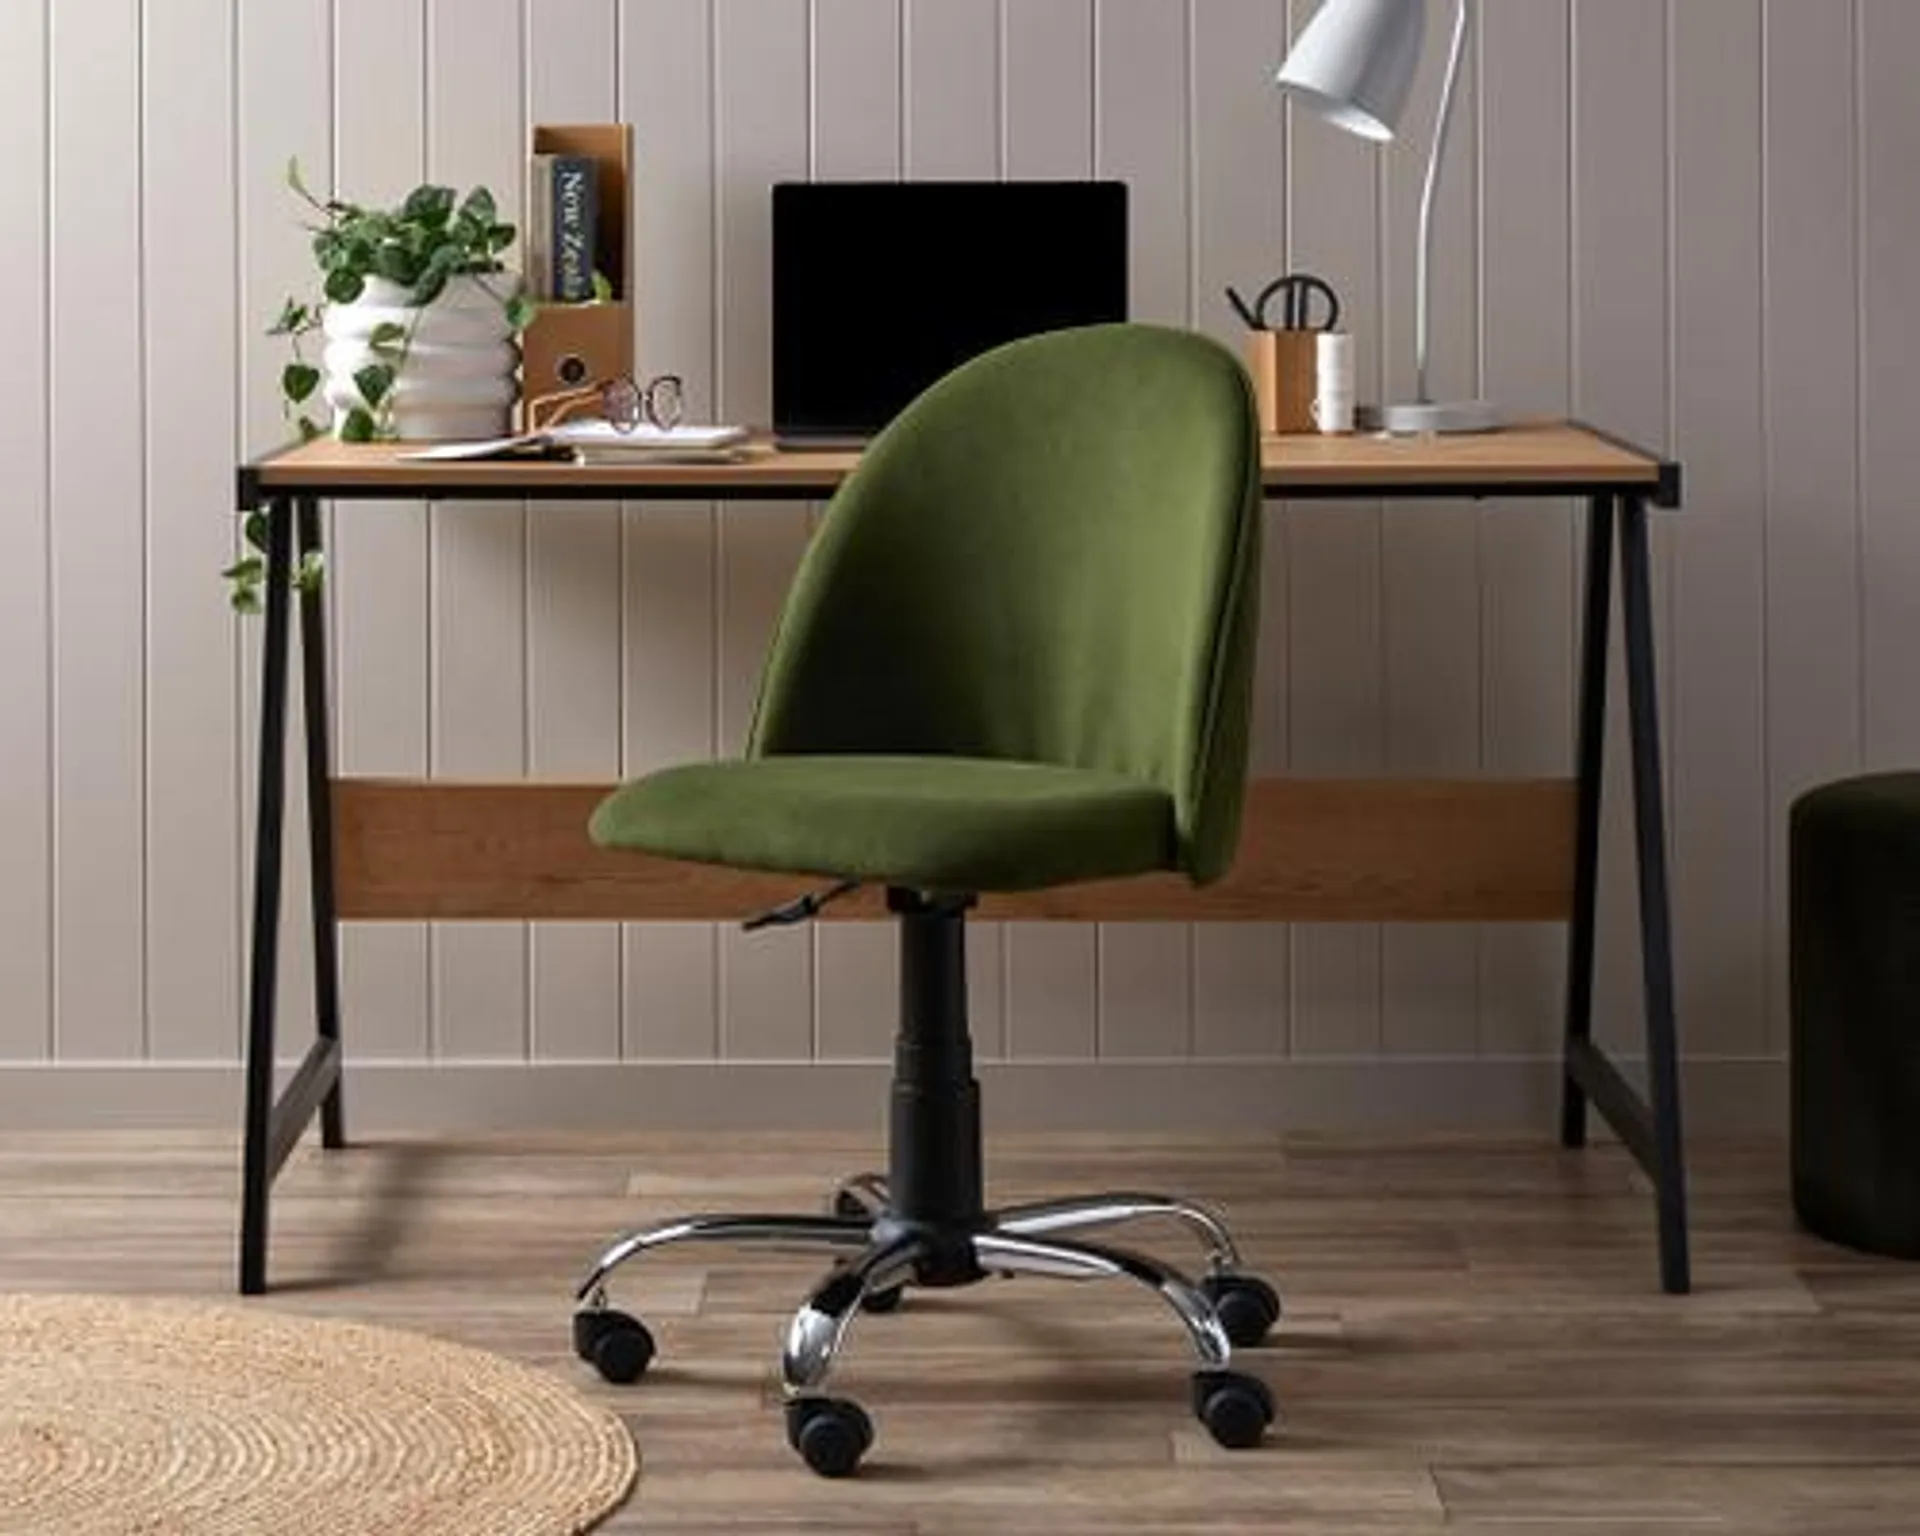 Nolan Office Chair - Olive Green